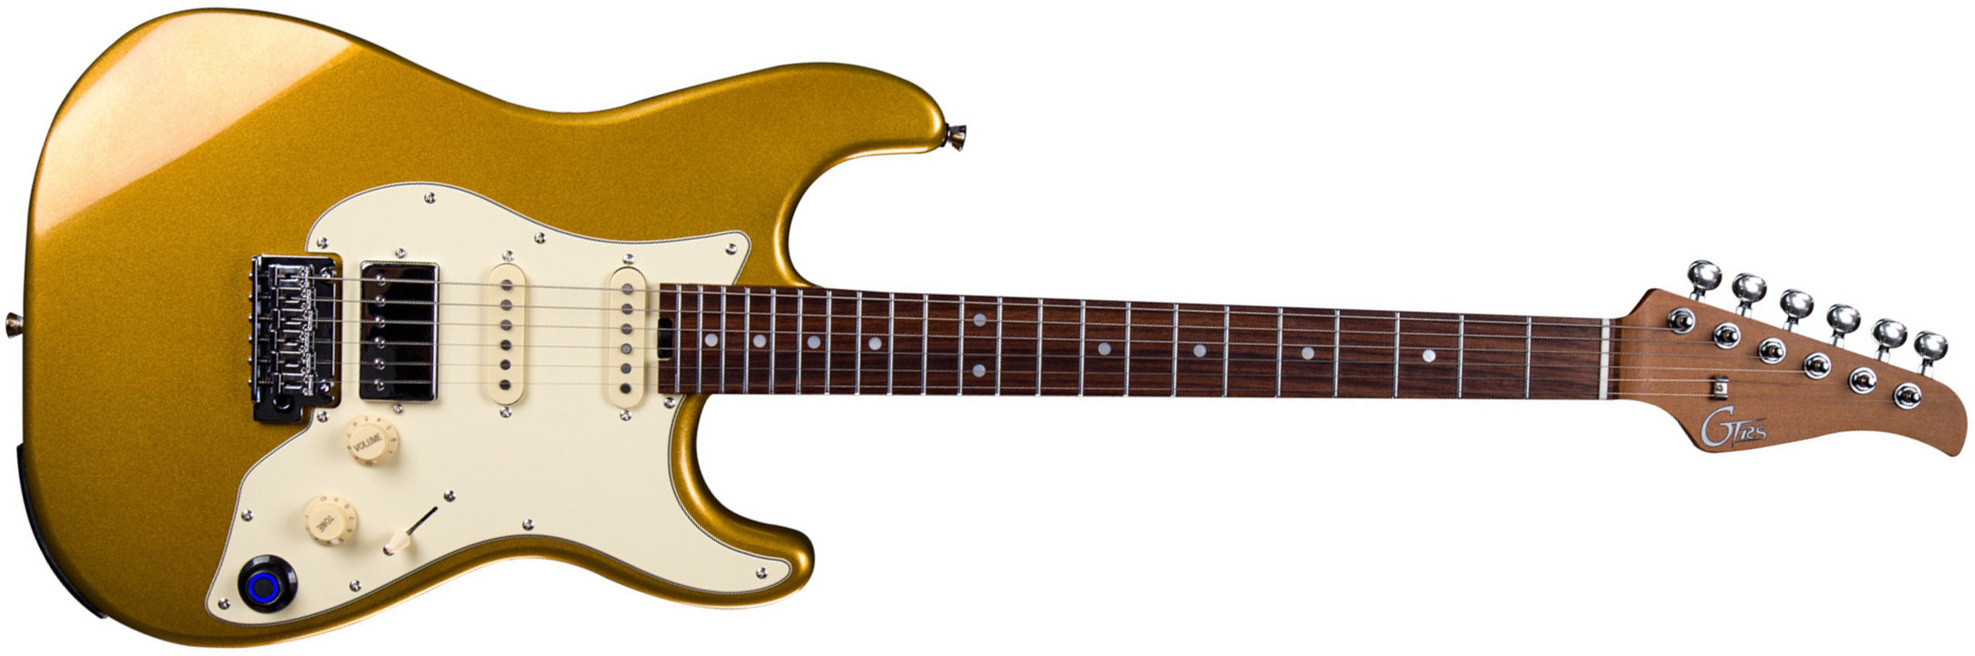 Mooer Gtrs S800 Hss Trem Rw - Gold - Modeling guitar - Main picture